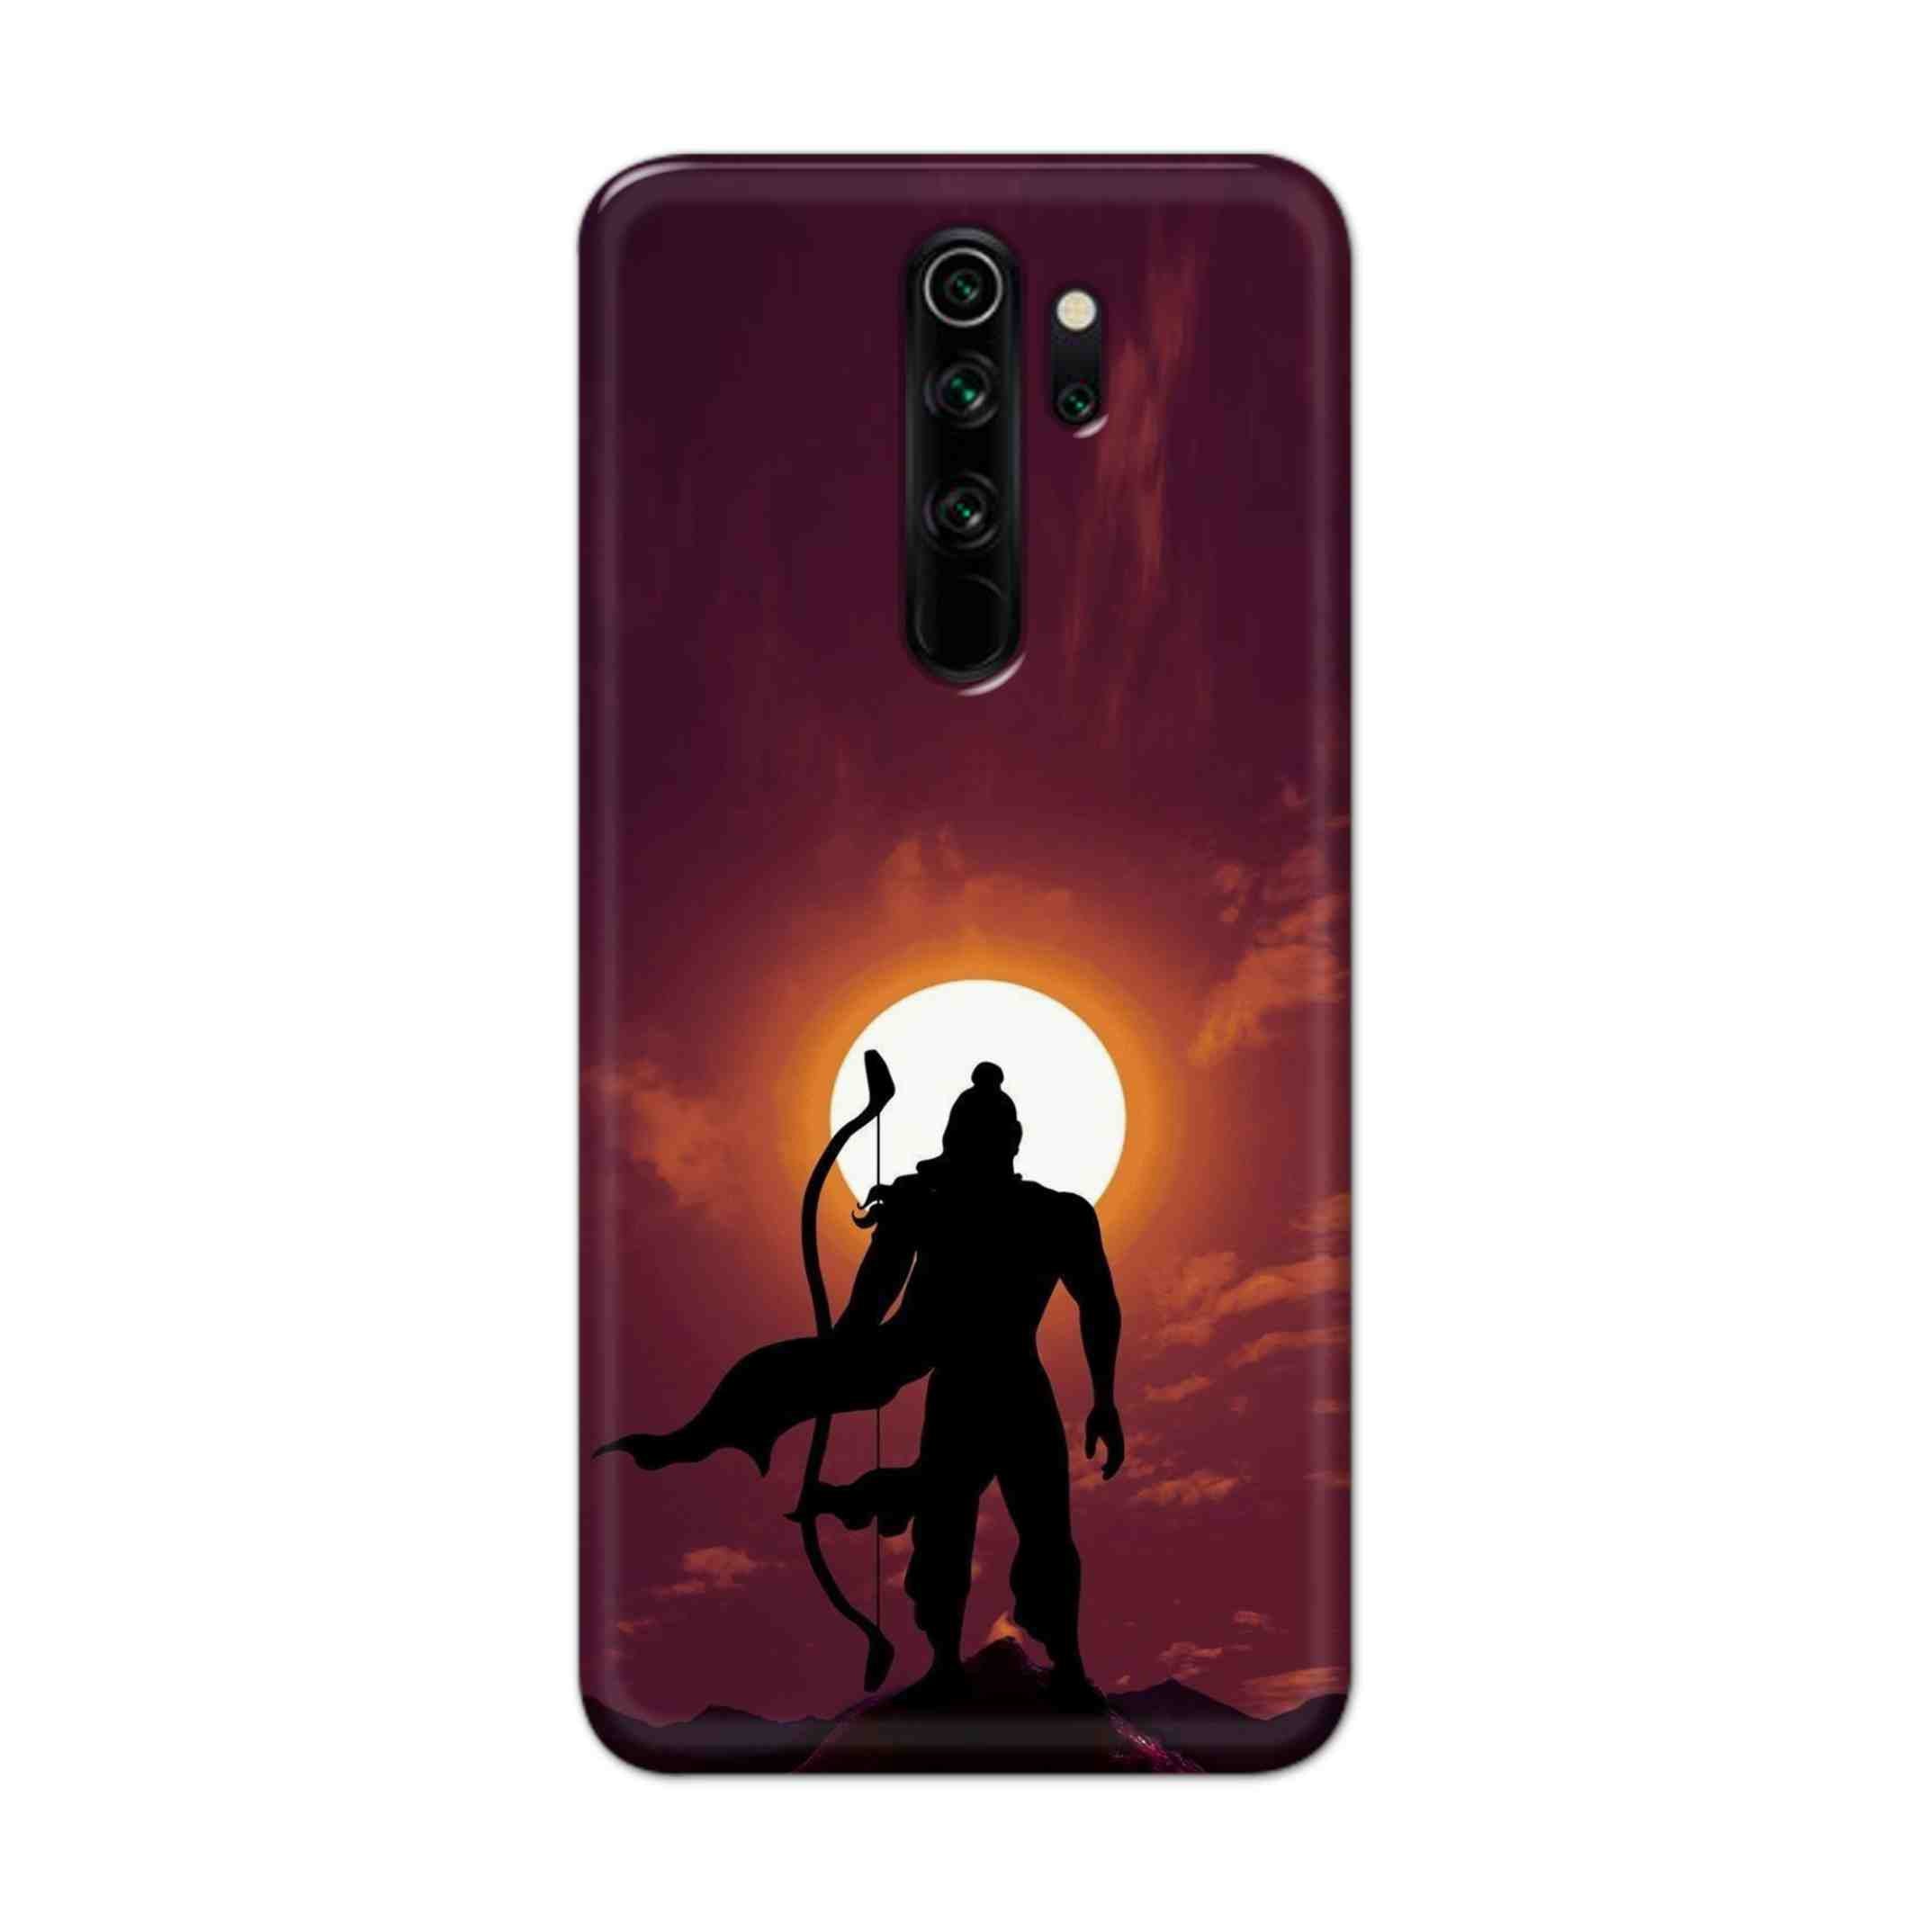 Buy Ram Hard Back Mobile Phone Case Cover For Xiaomi Redmi Note 8 Pro Online